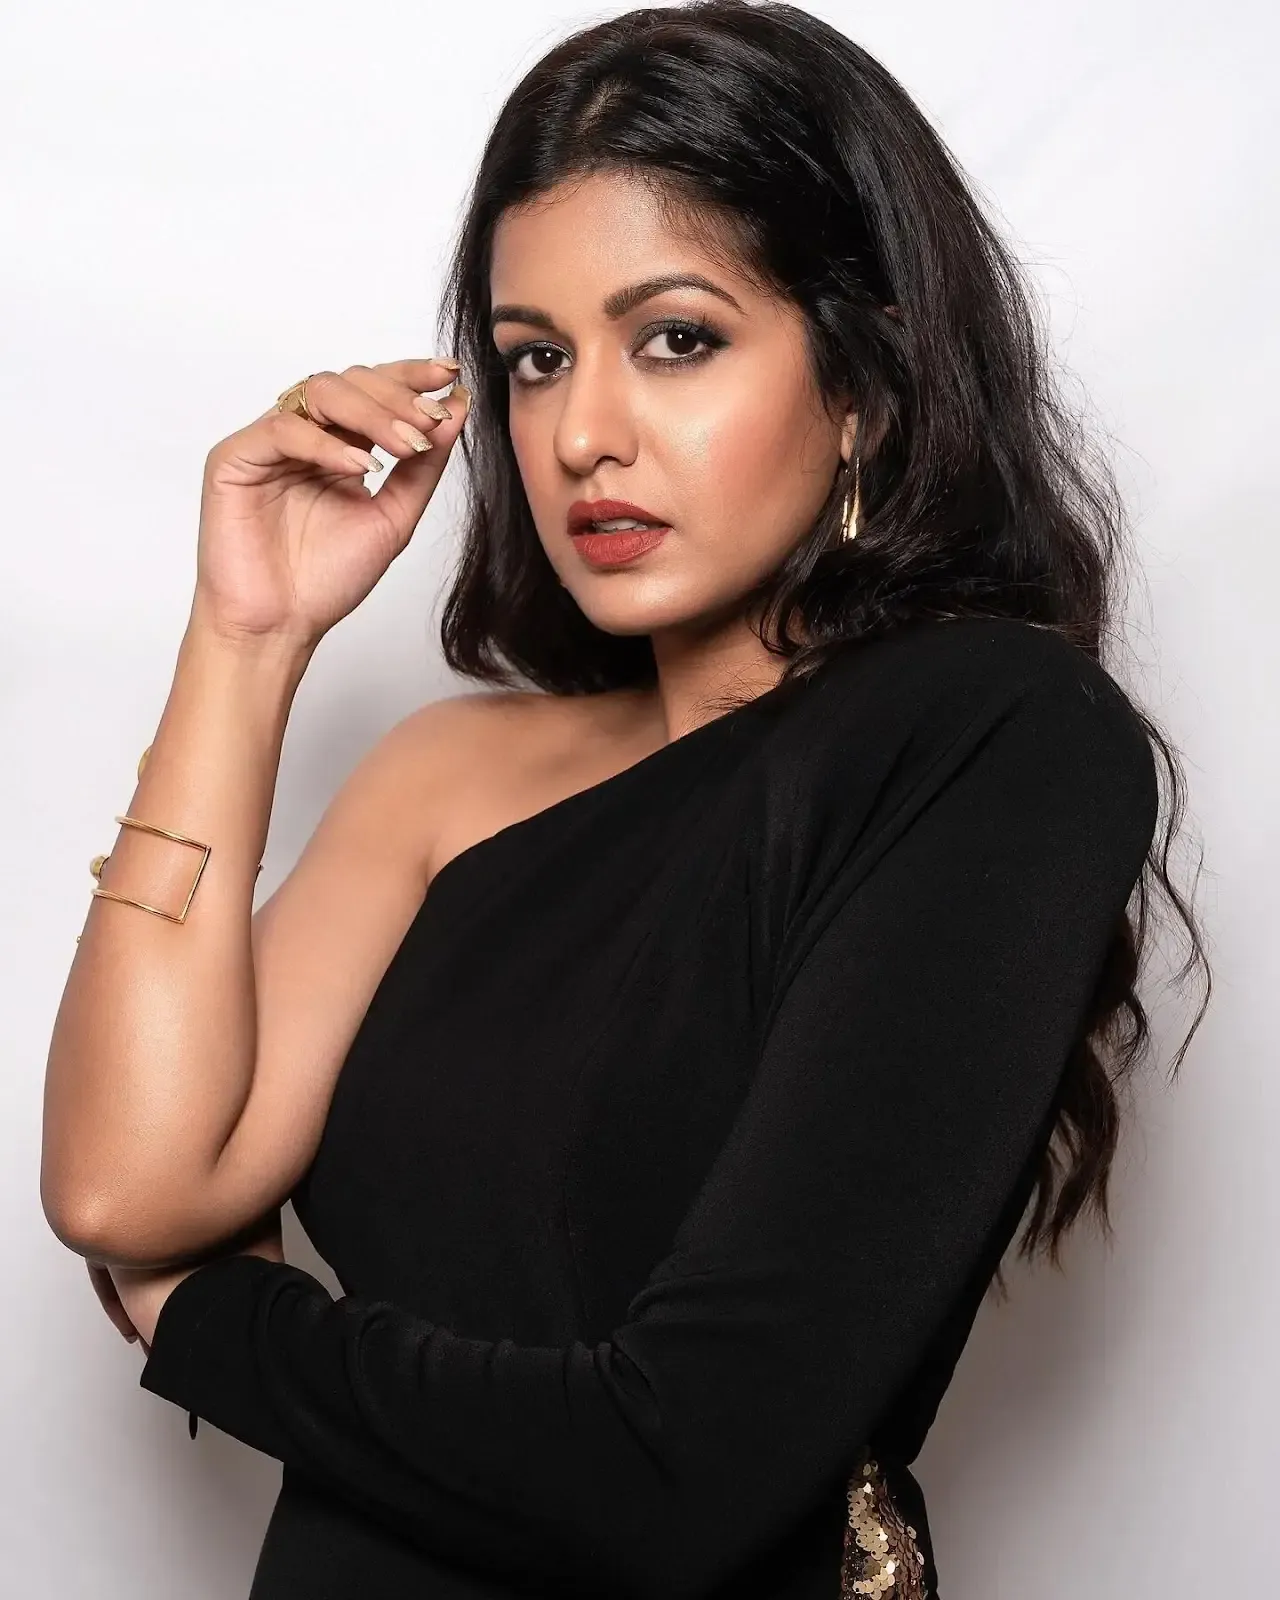 South Indian Actress Ishita Dutta Images In Sleeveless Black Top